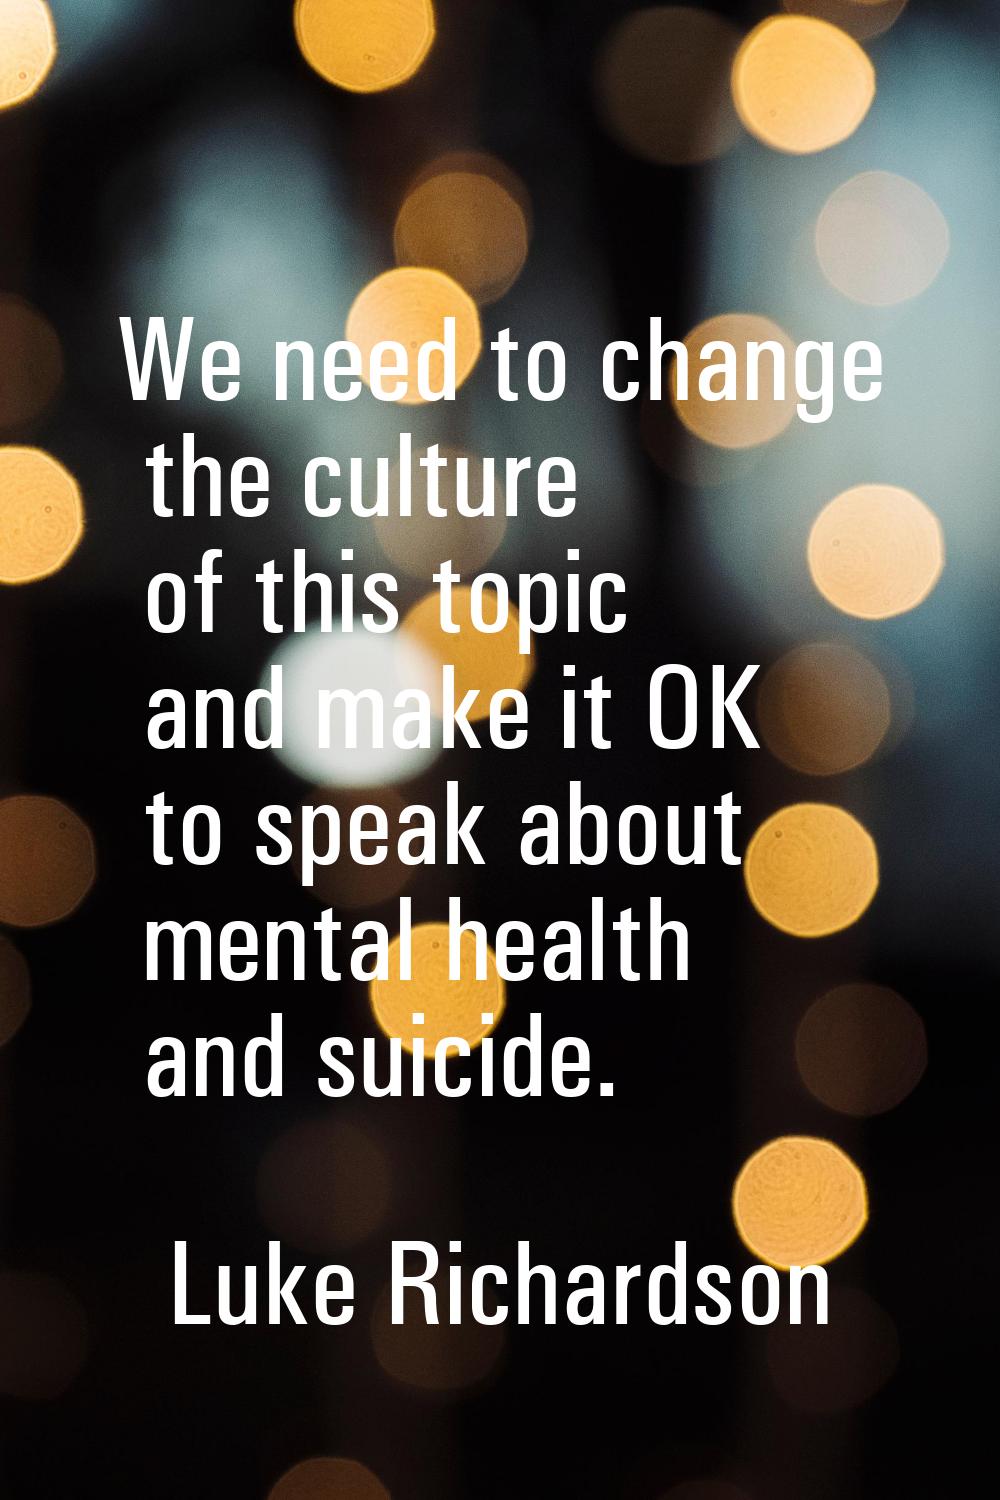 We need to change the culture of this topic and make it OK to speak about mental health and suicide